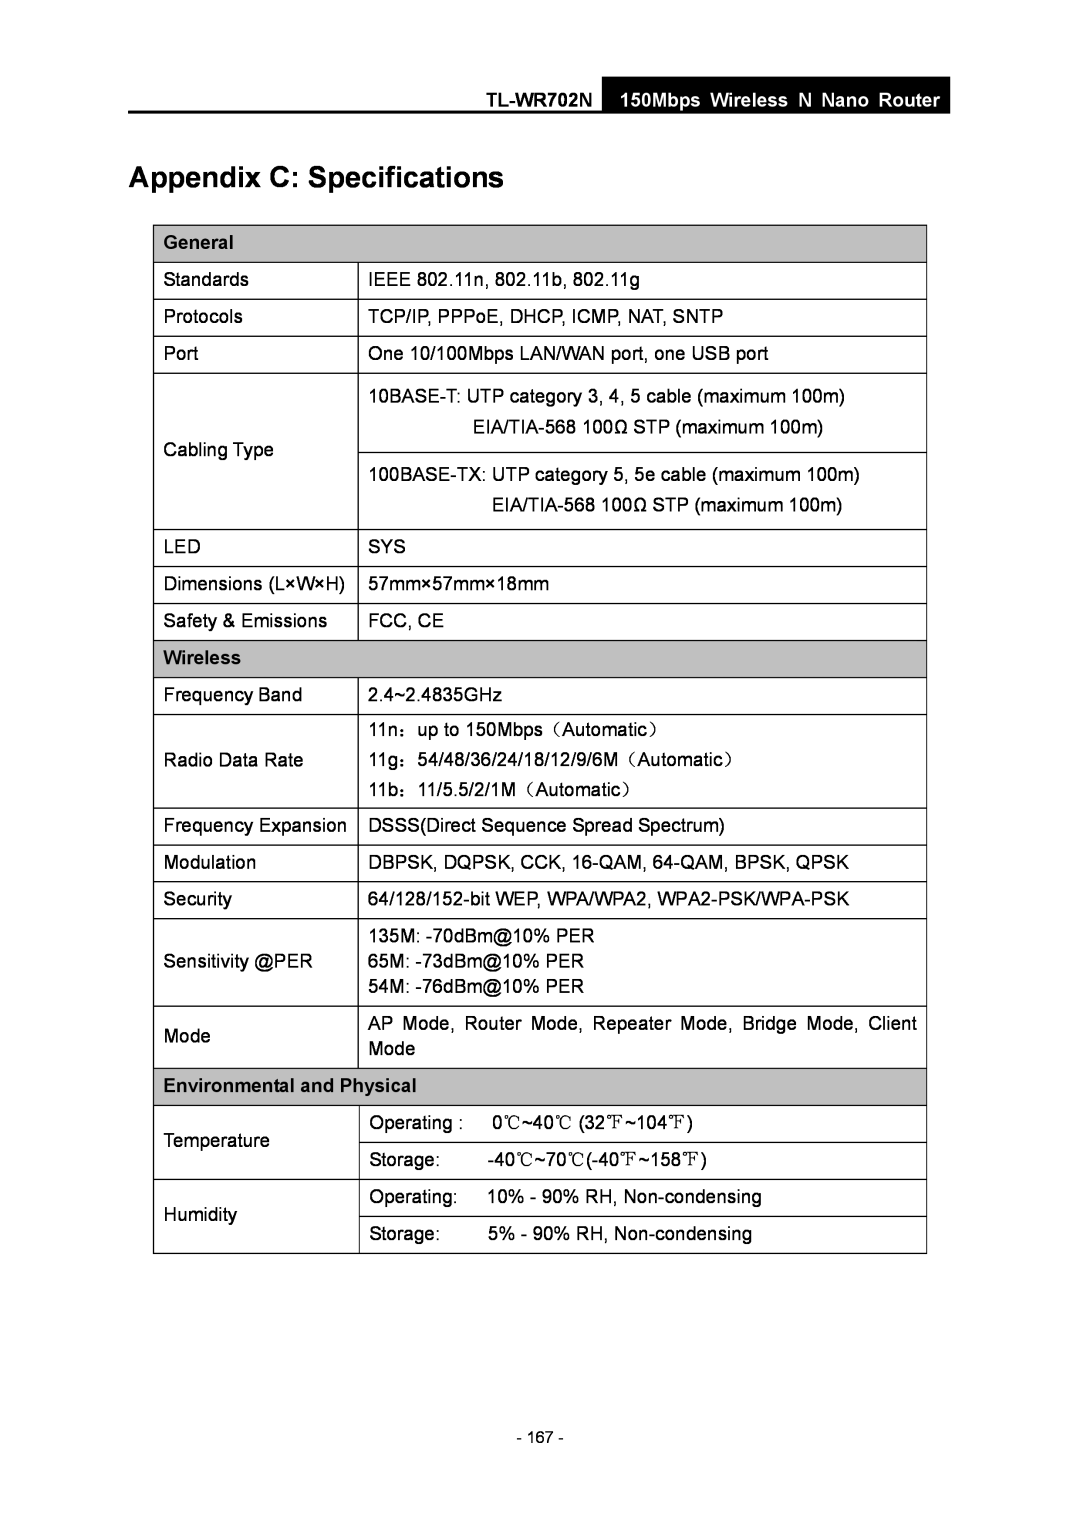 TP-Link TL-WR702N manual Appendix C Specifications, General, Environmental and Physical, 150Mbps Wireless N Nano Router 